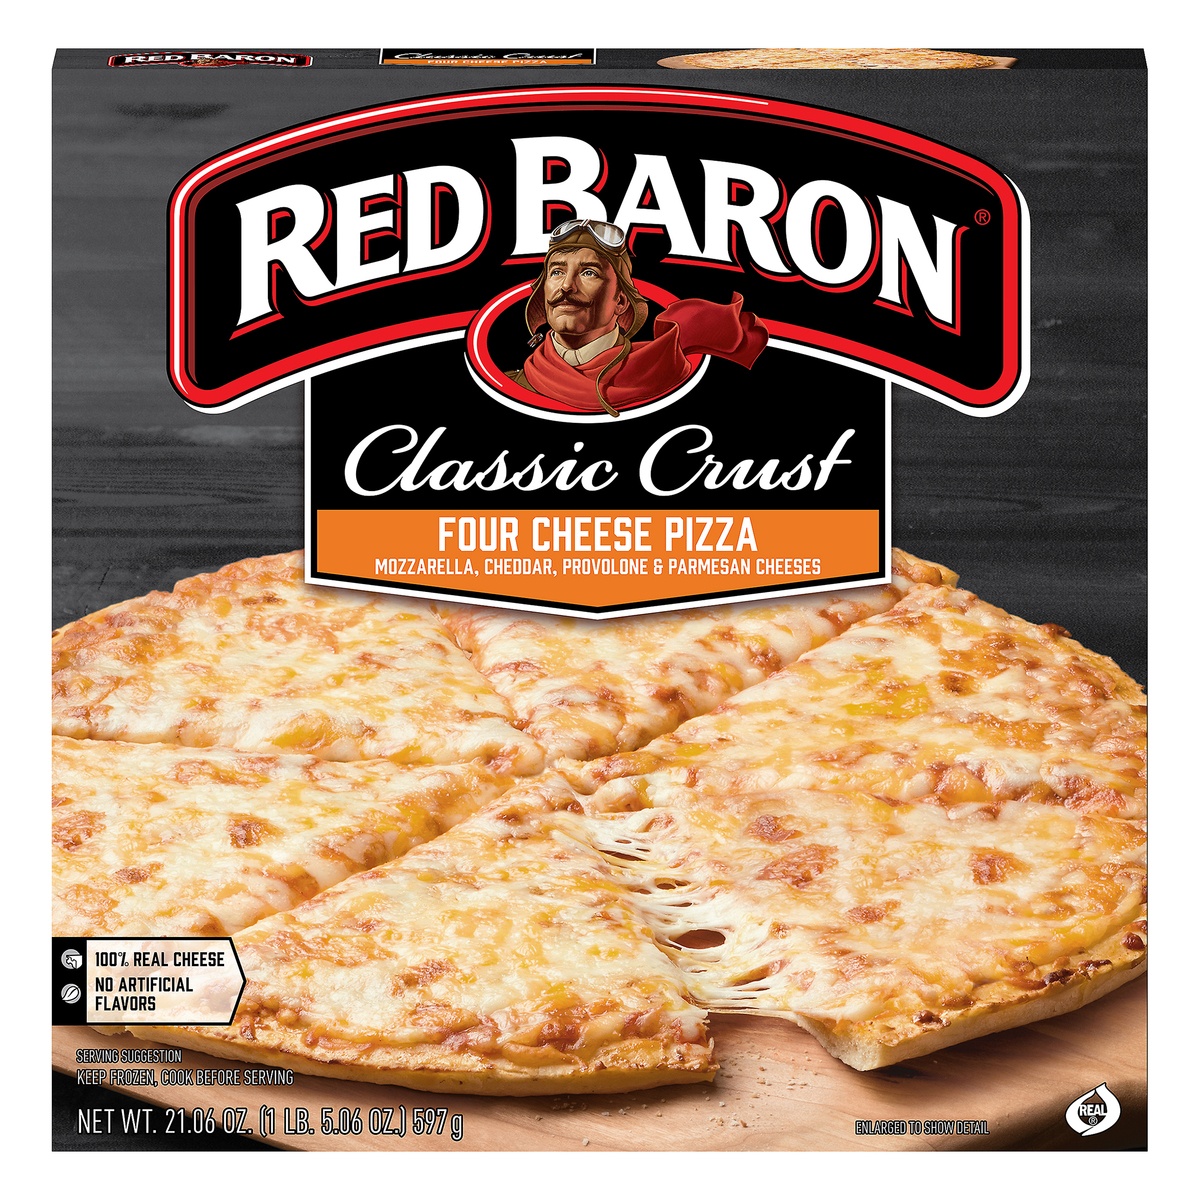 slide 11 of 11, Red Baron Classic Crust Four Cheese Pizza, 20.66 oz